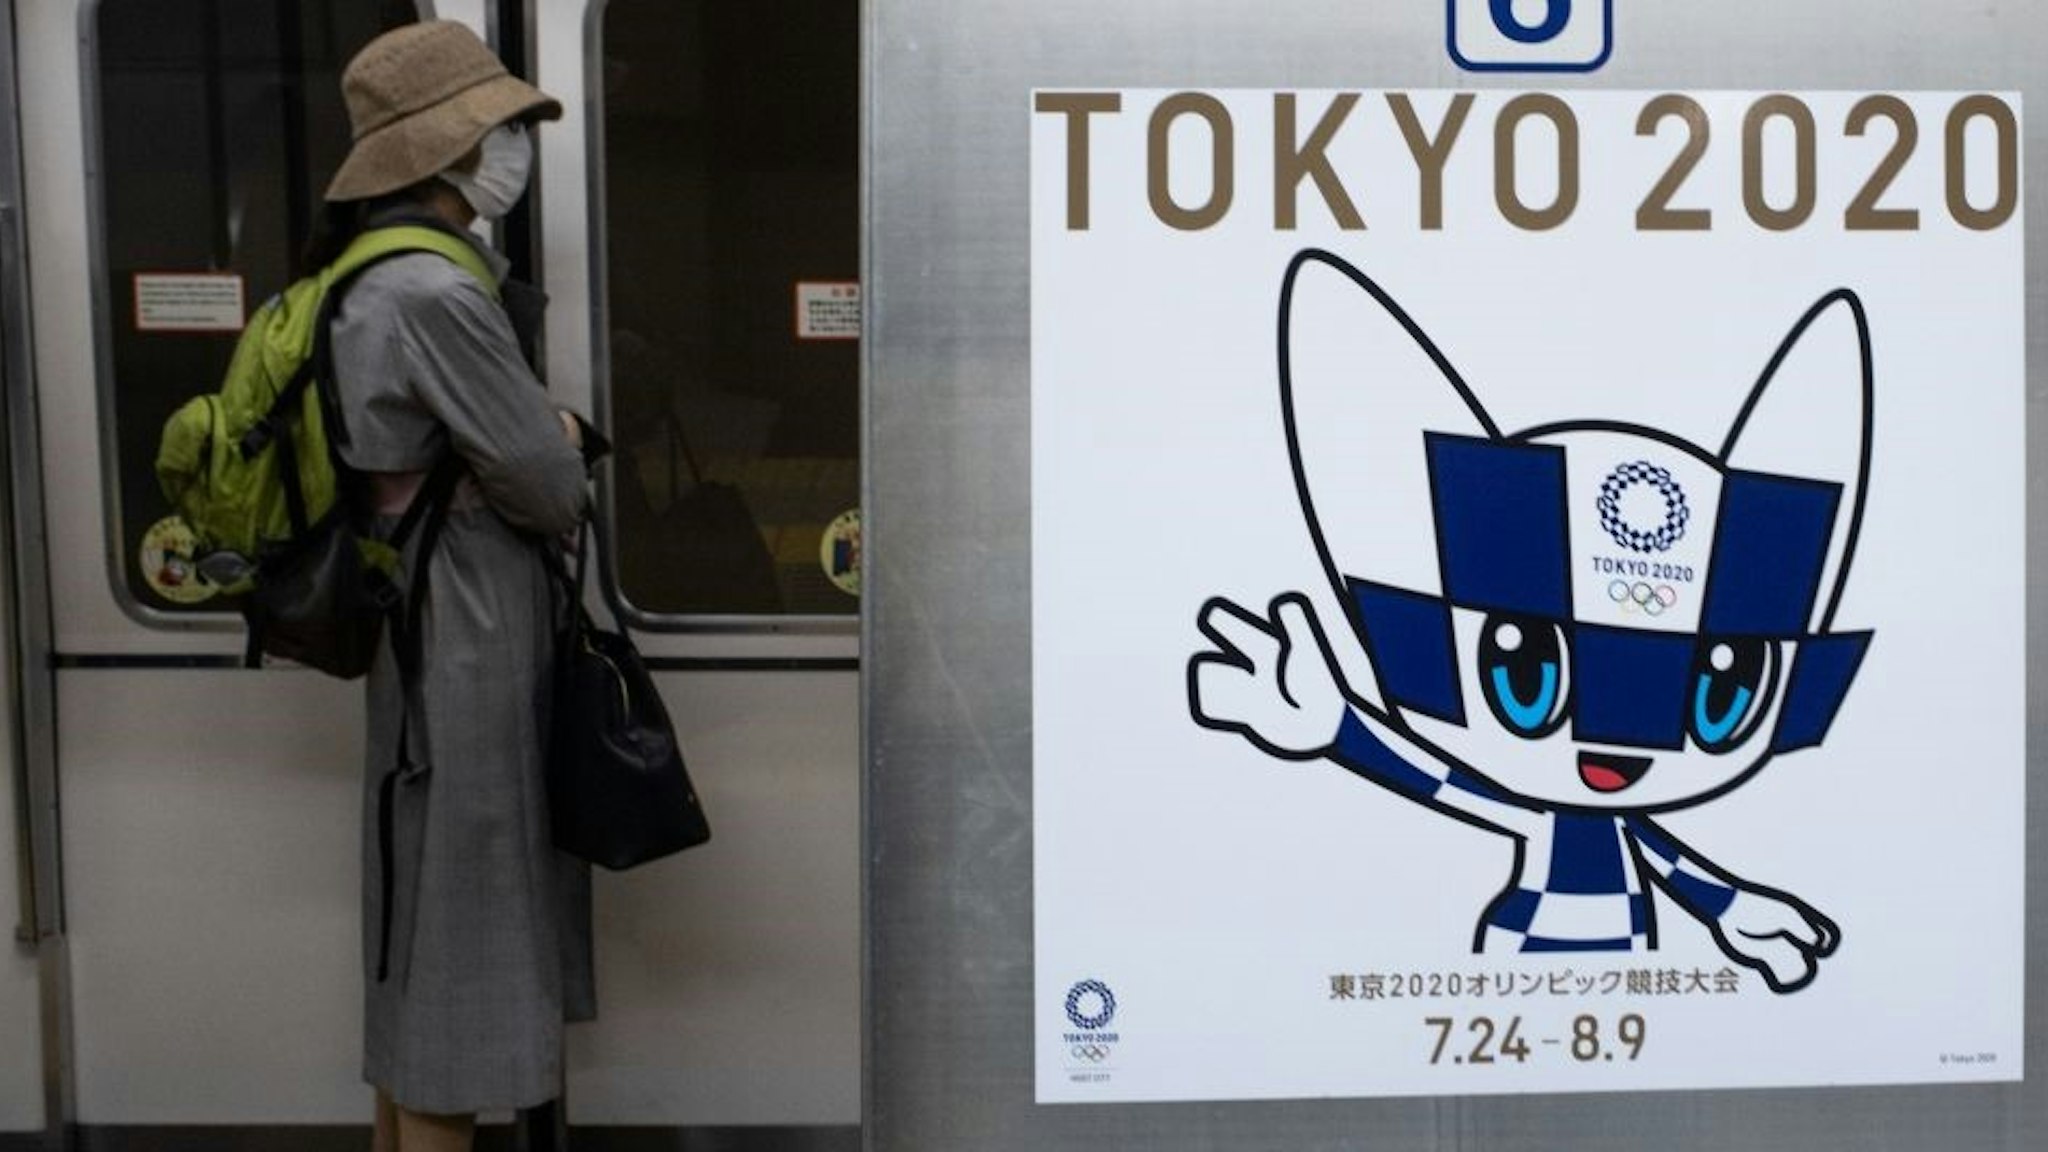 TOPSHOT - A passenger wearing a face mask stands next to a poster of Tokyo 2020 Olympic mascot Miraitowa on a train in Tokyo on April 20, 2020. - A Japanese expert who has criticised the country's response to the coronavirus warned on April 20 that he is "pessimistic" that the postponed Olympics can be held even in 2021. (Photo by Philip FONG / AFP) (Photo by